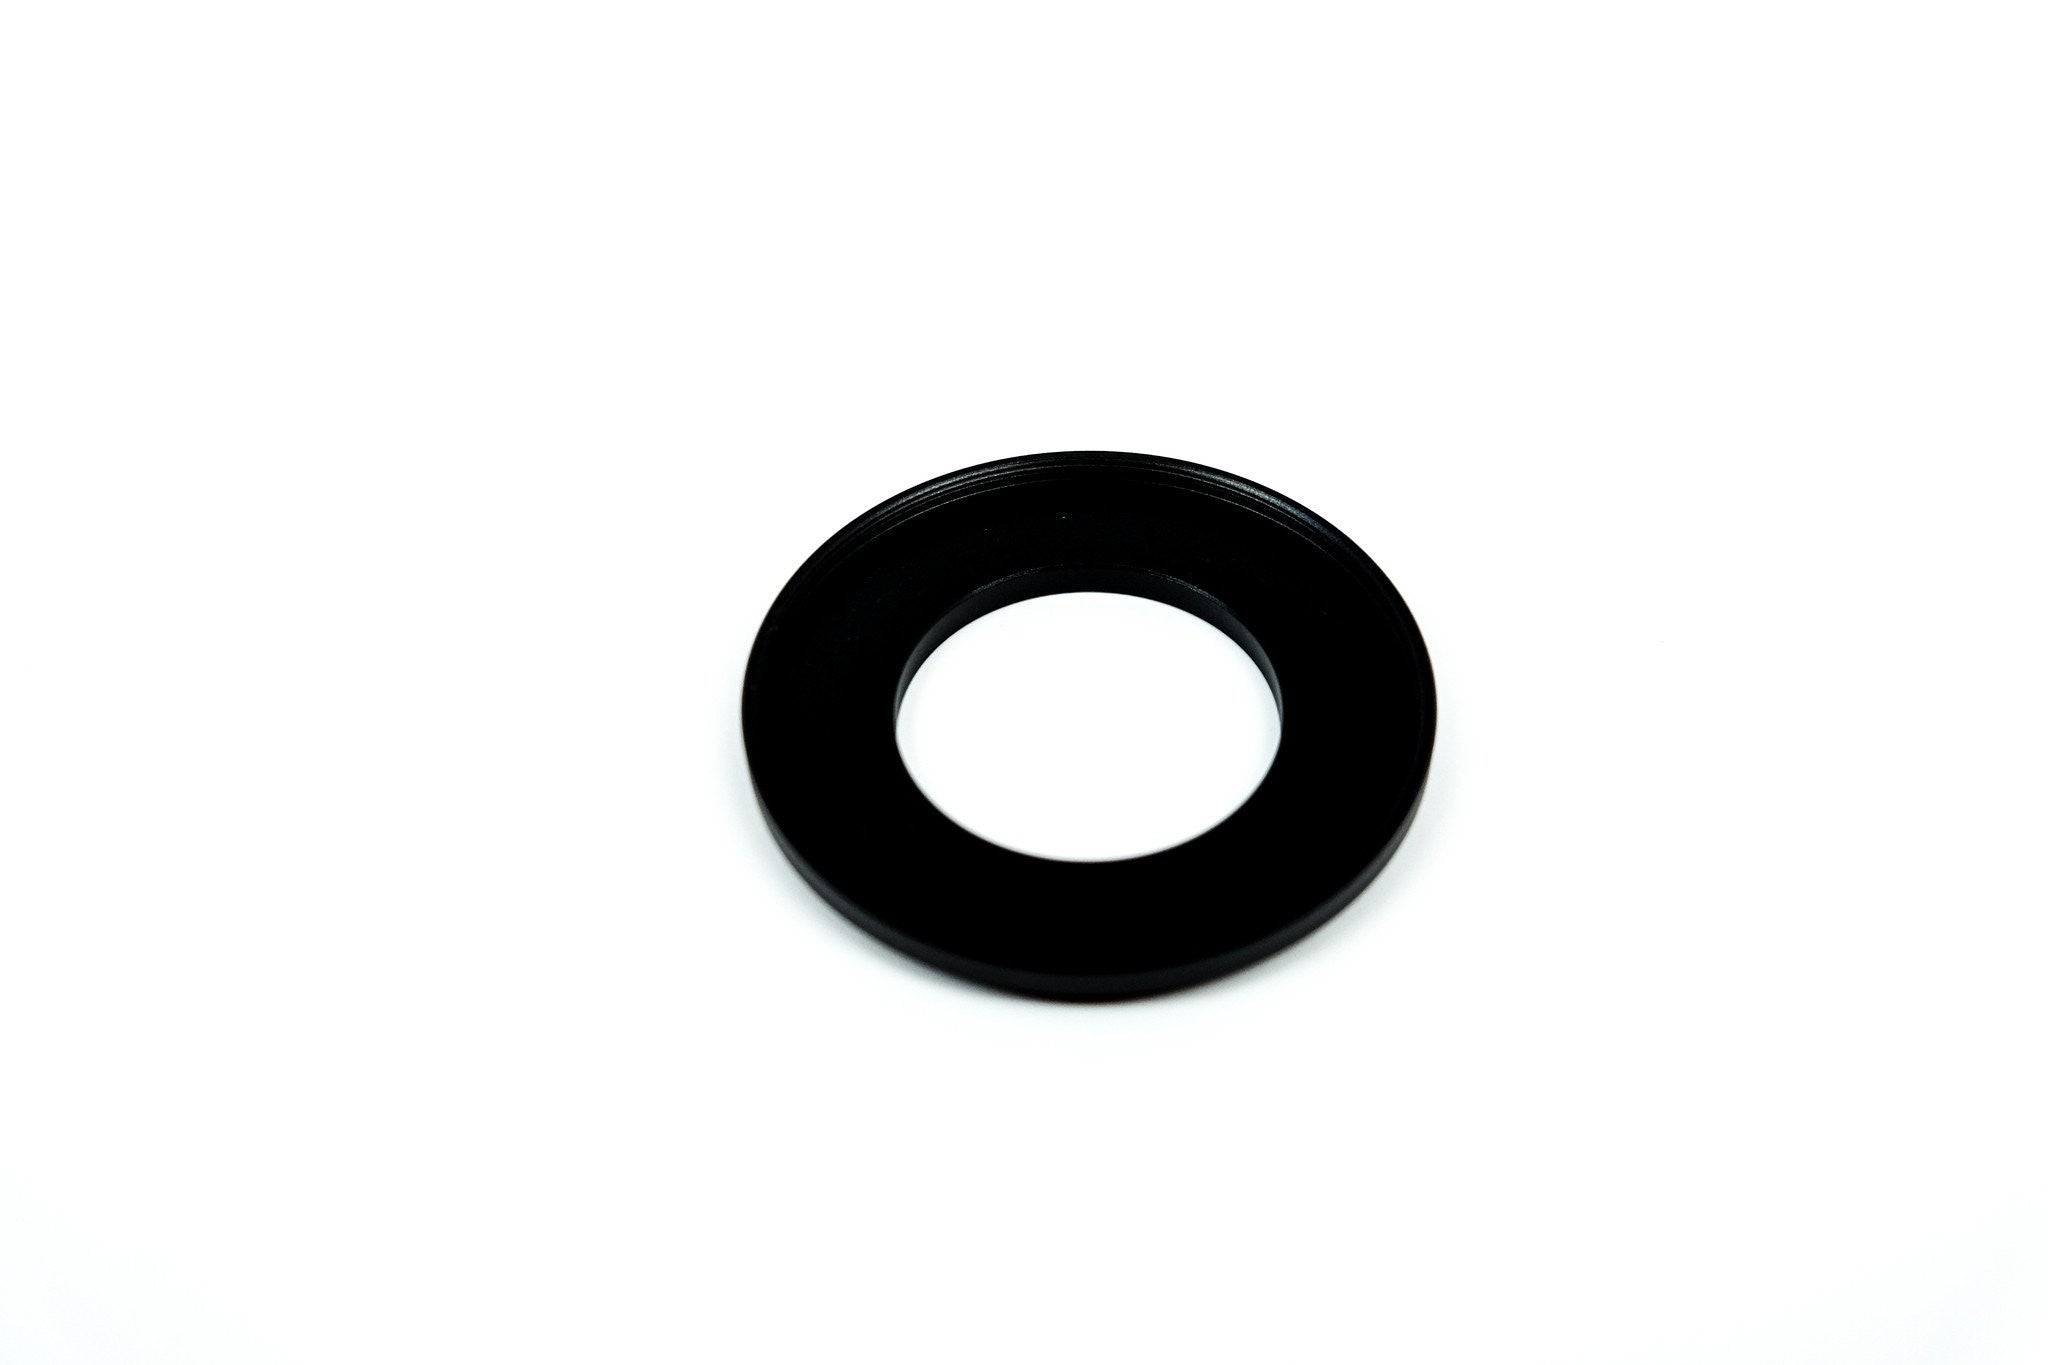 37mm to 58mm Step Ring